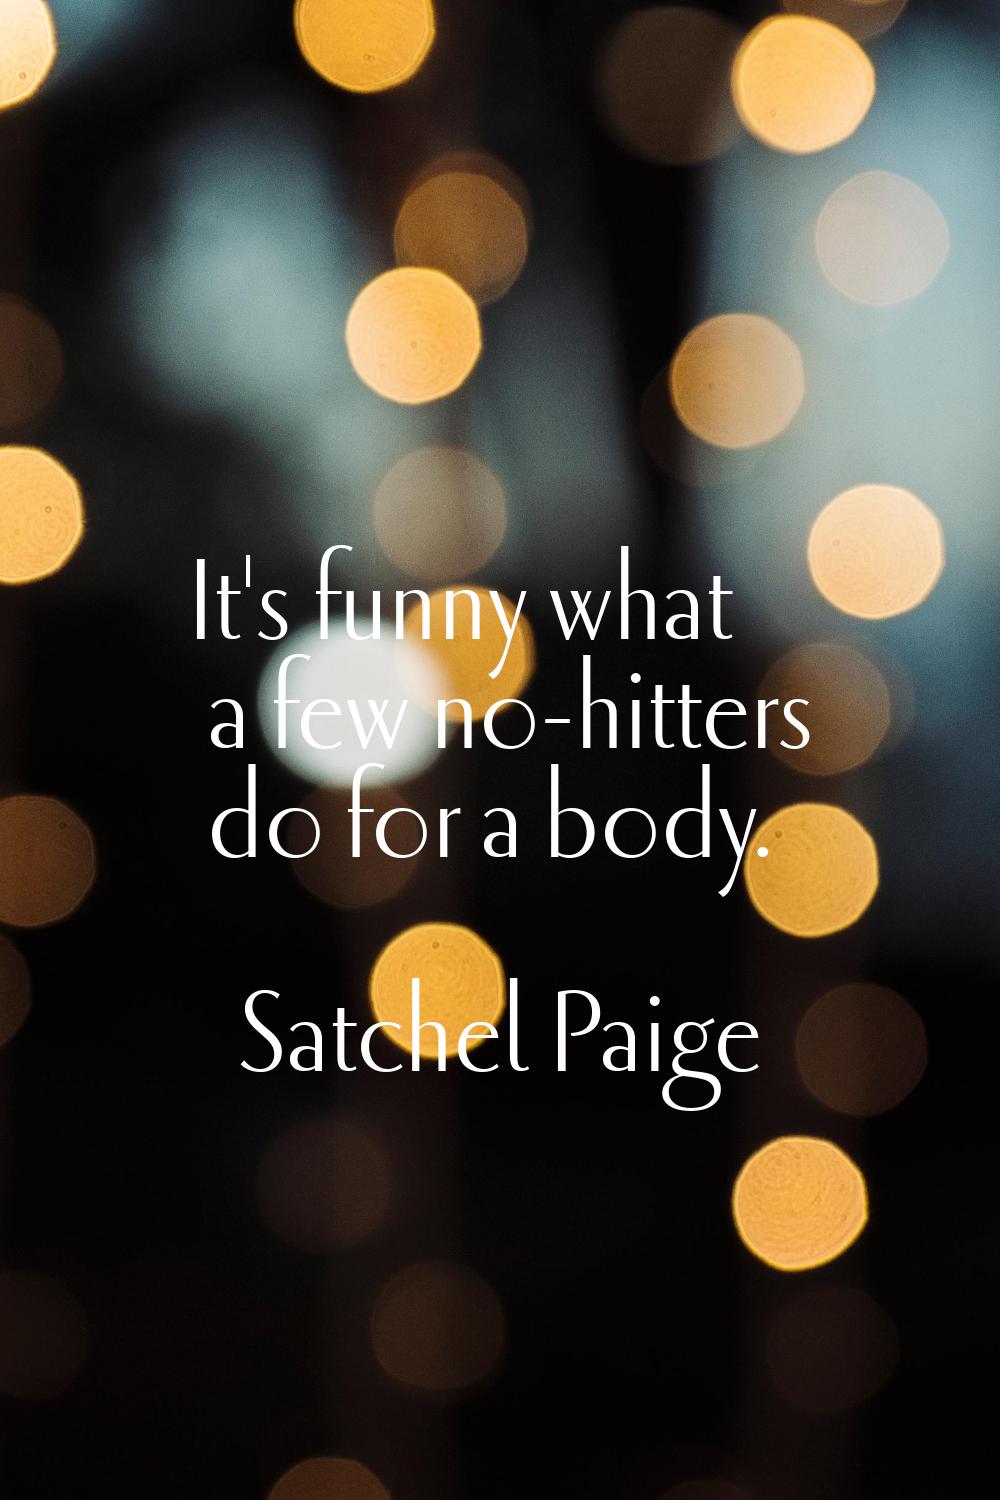 It's funny what a few no-hitters do for a body.